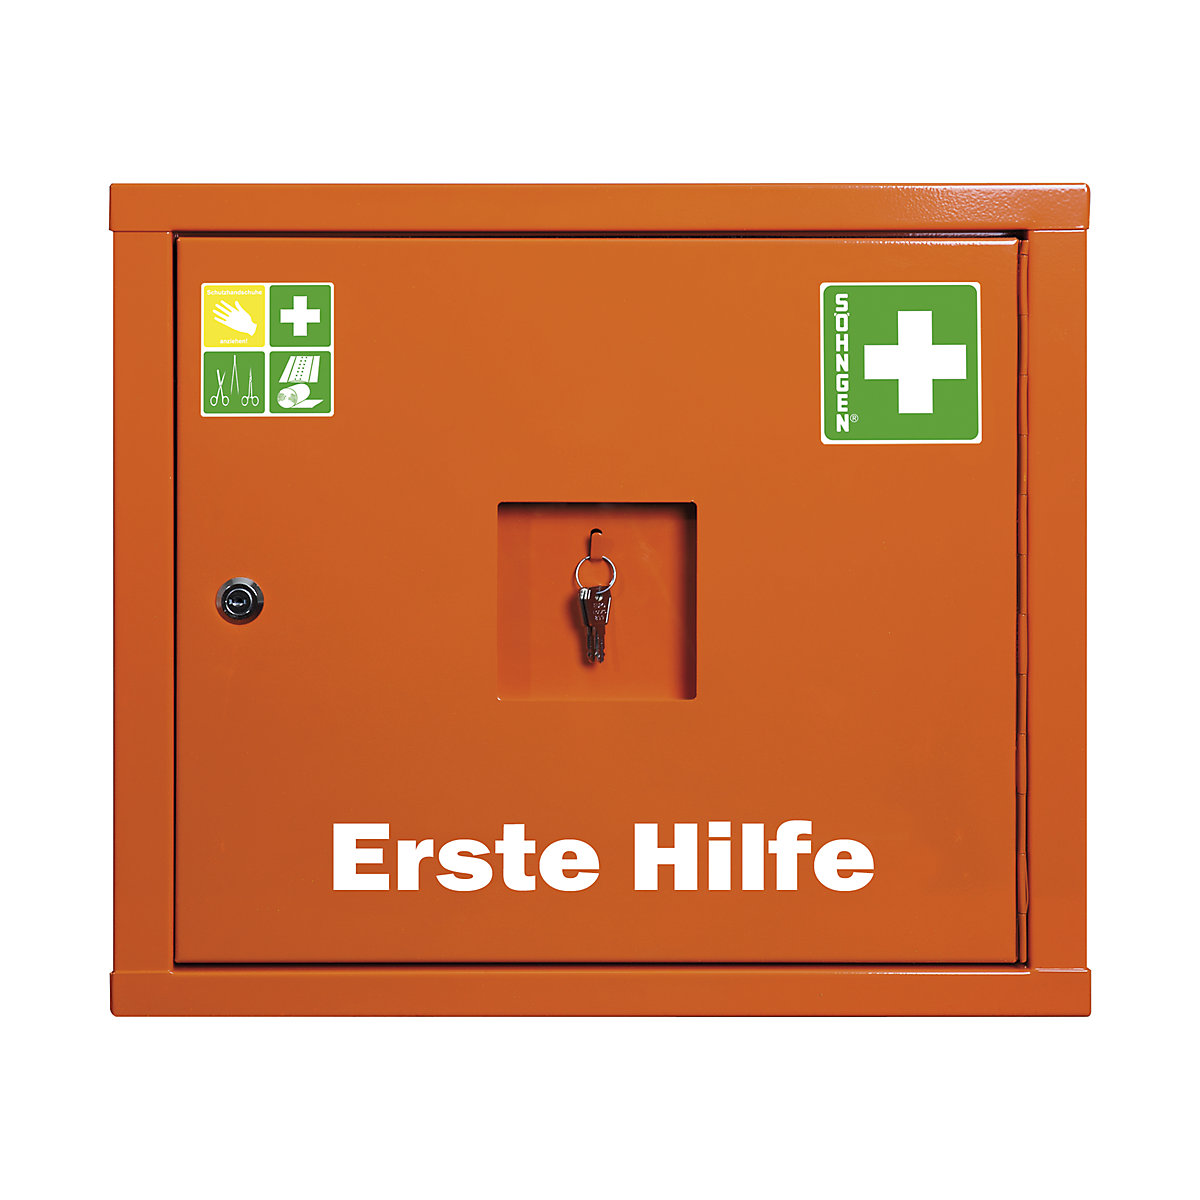 SÖHNGEN – First aid cupboard, DIN 13157, without contents, signal orange, depth 200 mm, HxW 420 x 490 mm